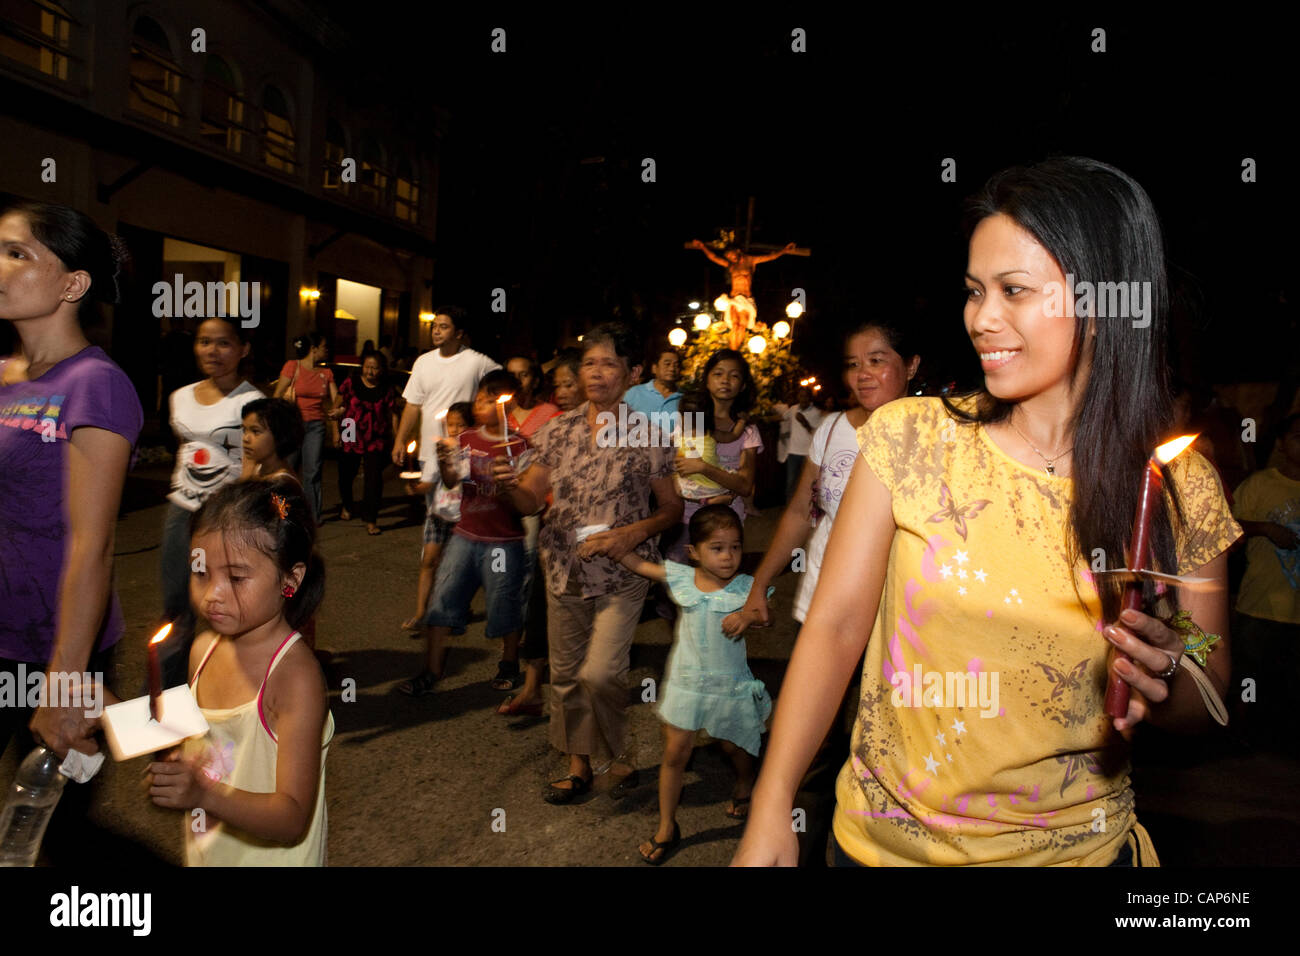 Cebu City, Philippines, 4.April 2012: Traditional Easter ceremonial parade with the Saints.  People holding candles during the parade. Stock Photo